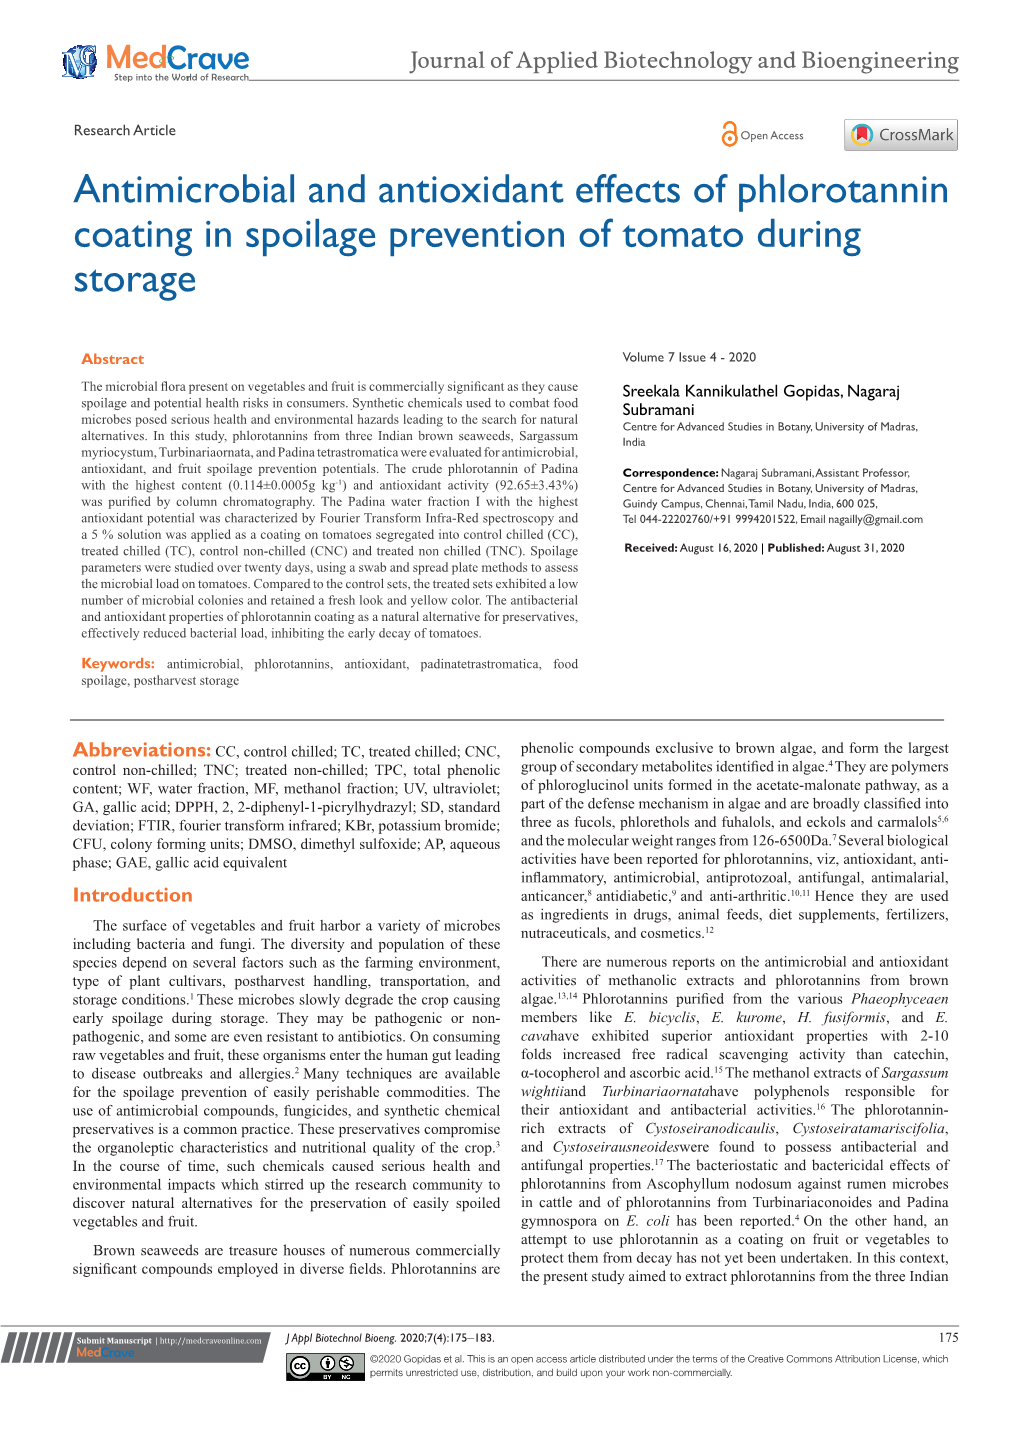 Antimicrobial and Antioxidant Effects of Phlorotannin Coating in Spoilage Prevention of Tomato During Storage